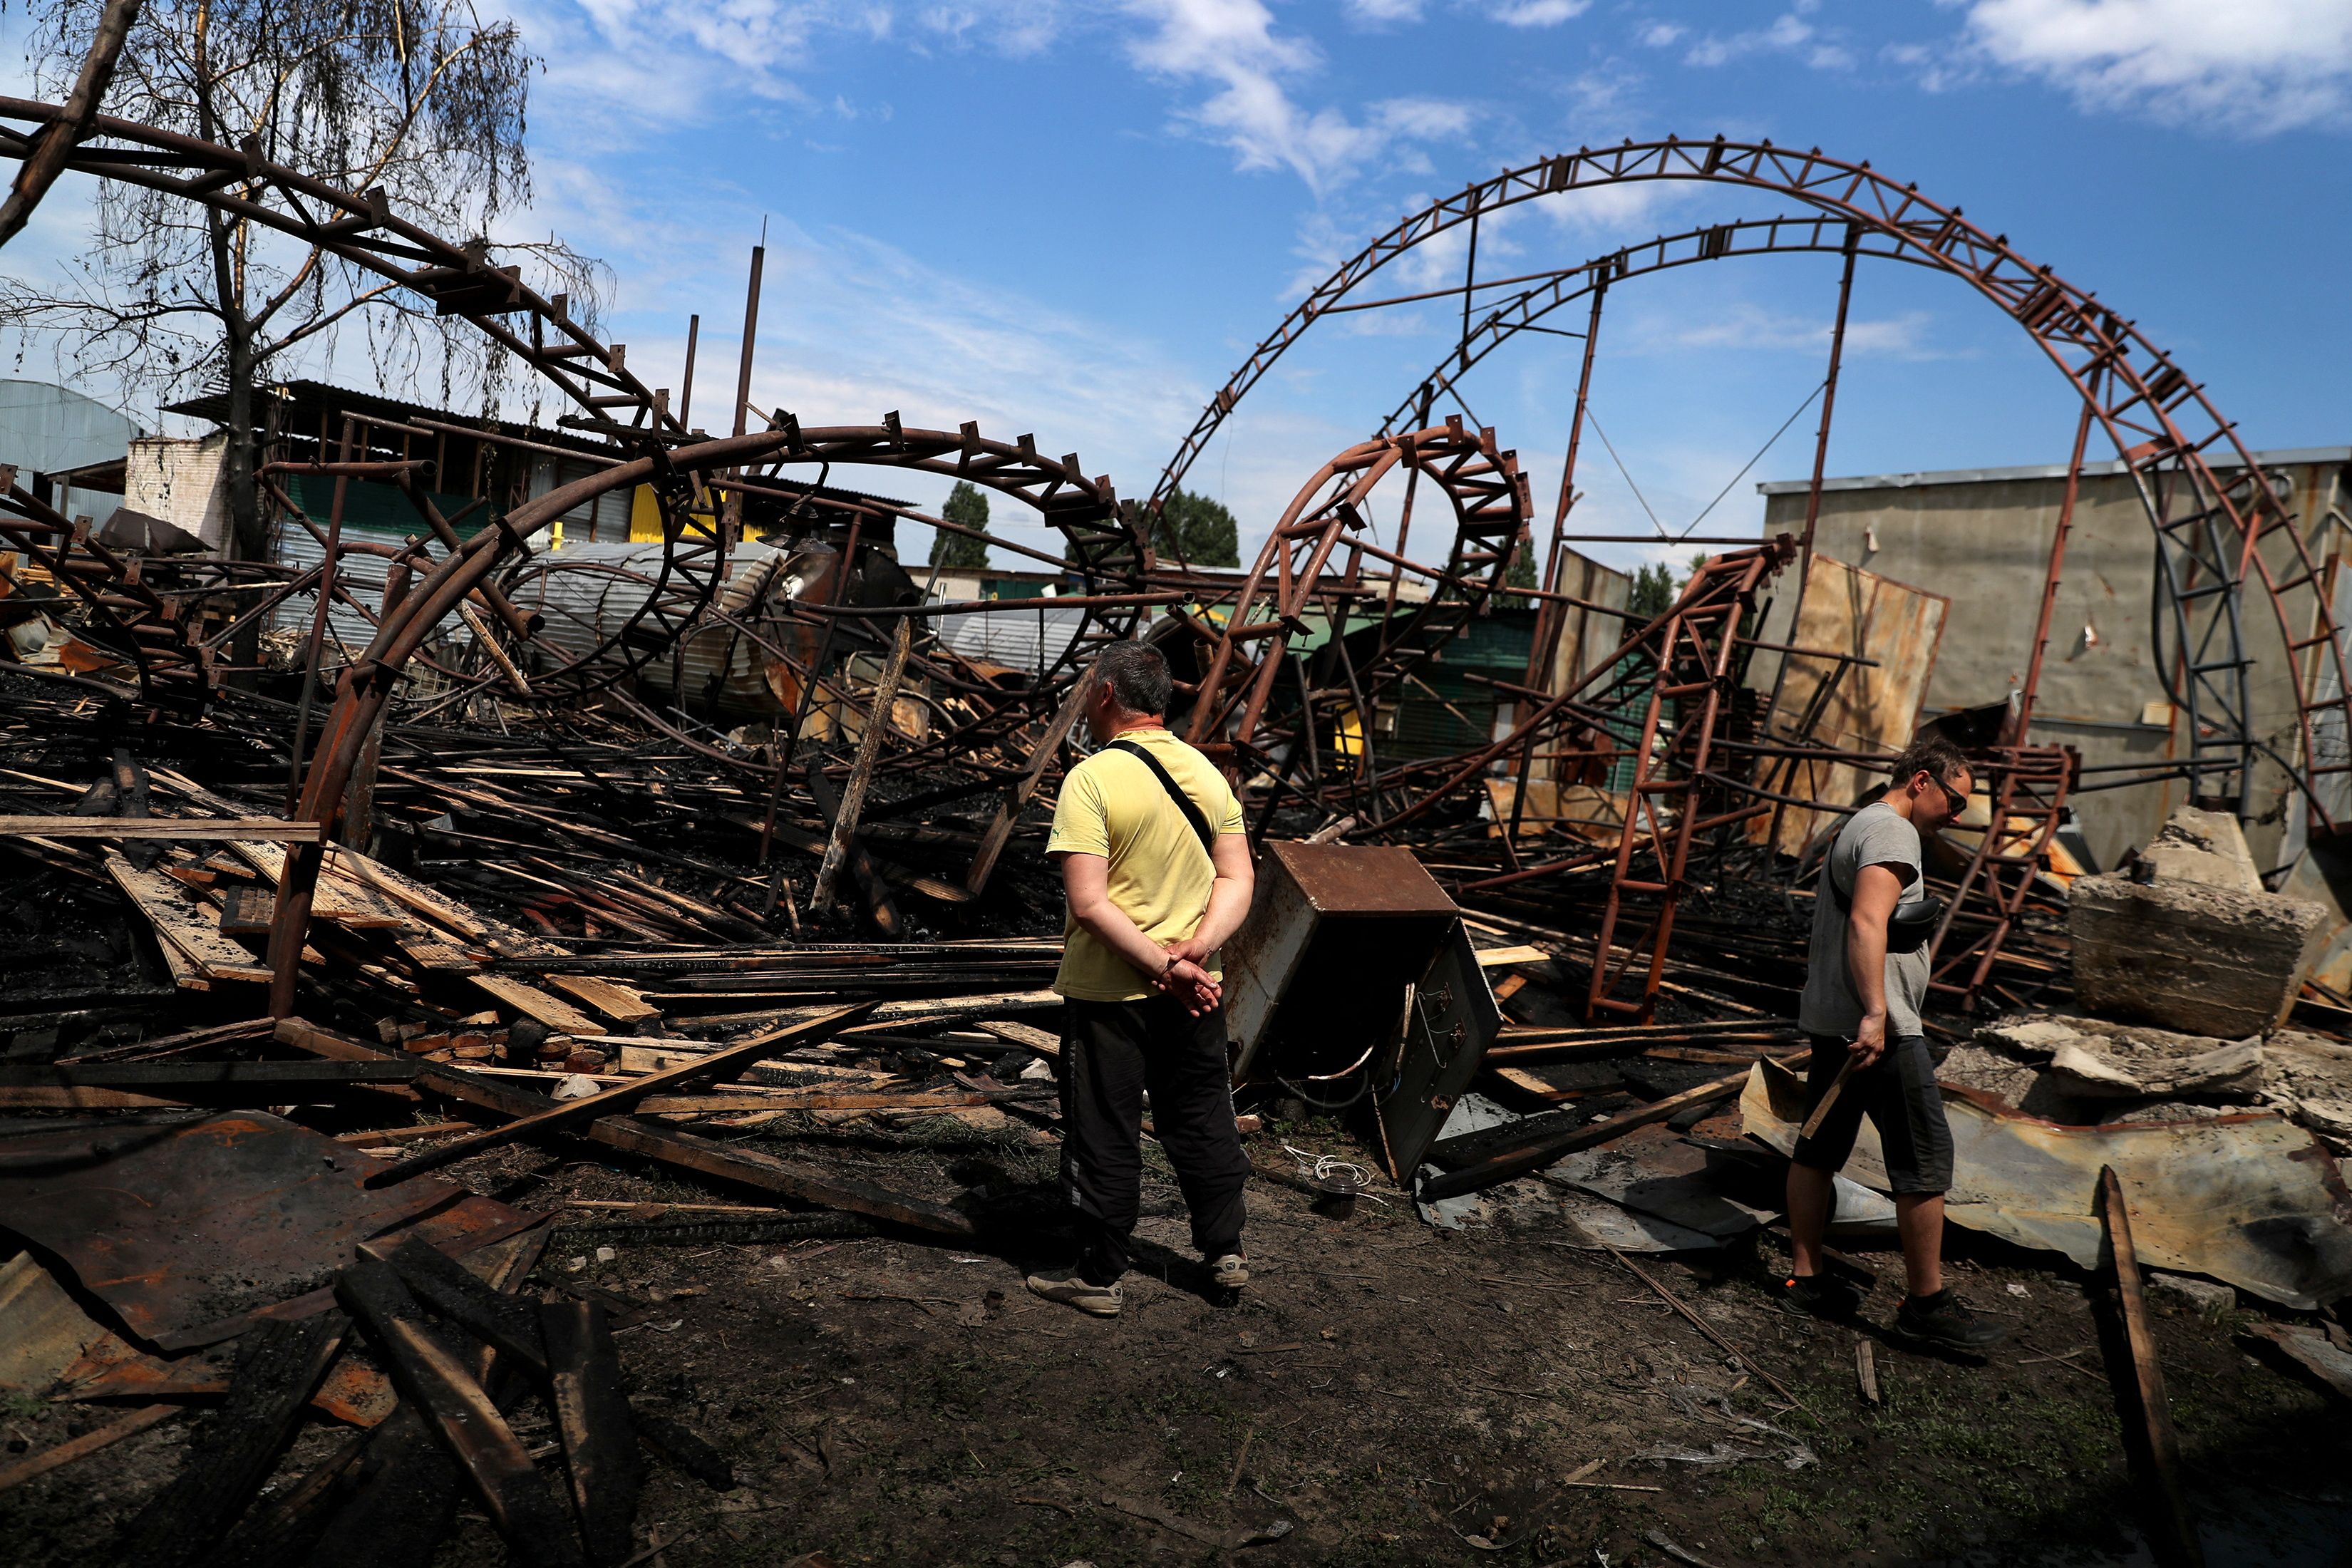 Workers inspect a damaged wood warehouse after a strike, amid Russia's attack on Ukraine, in the outskirt of Kharkiv, Ukraine June 3, 2022. (Photo by Reuters)